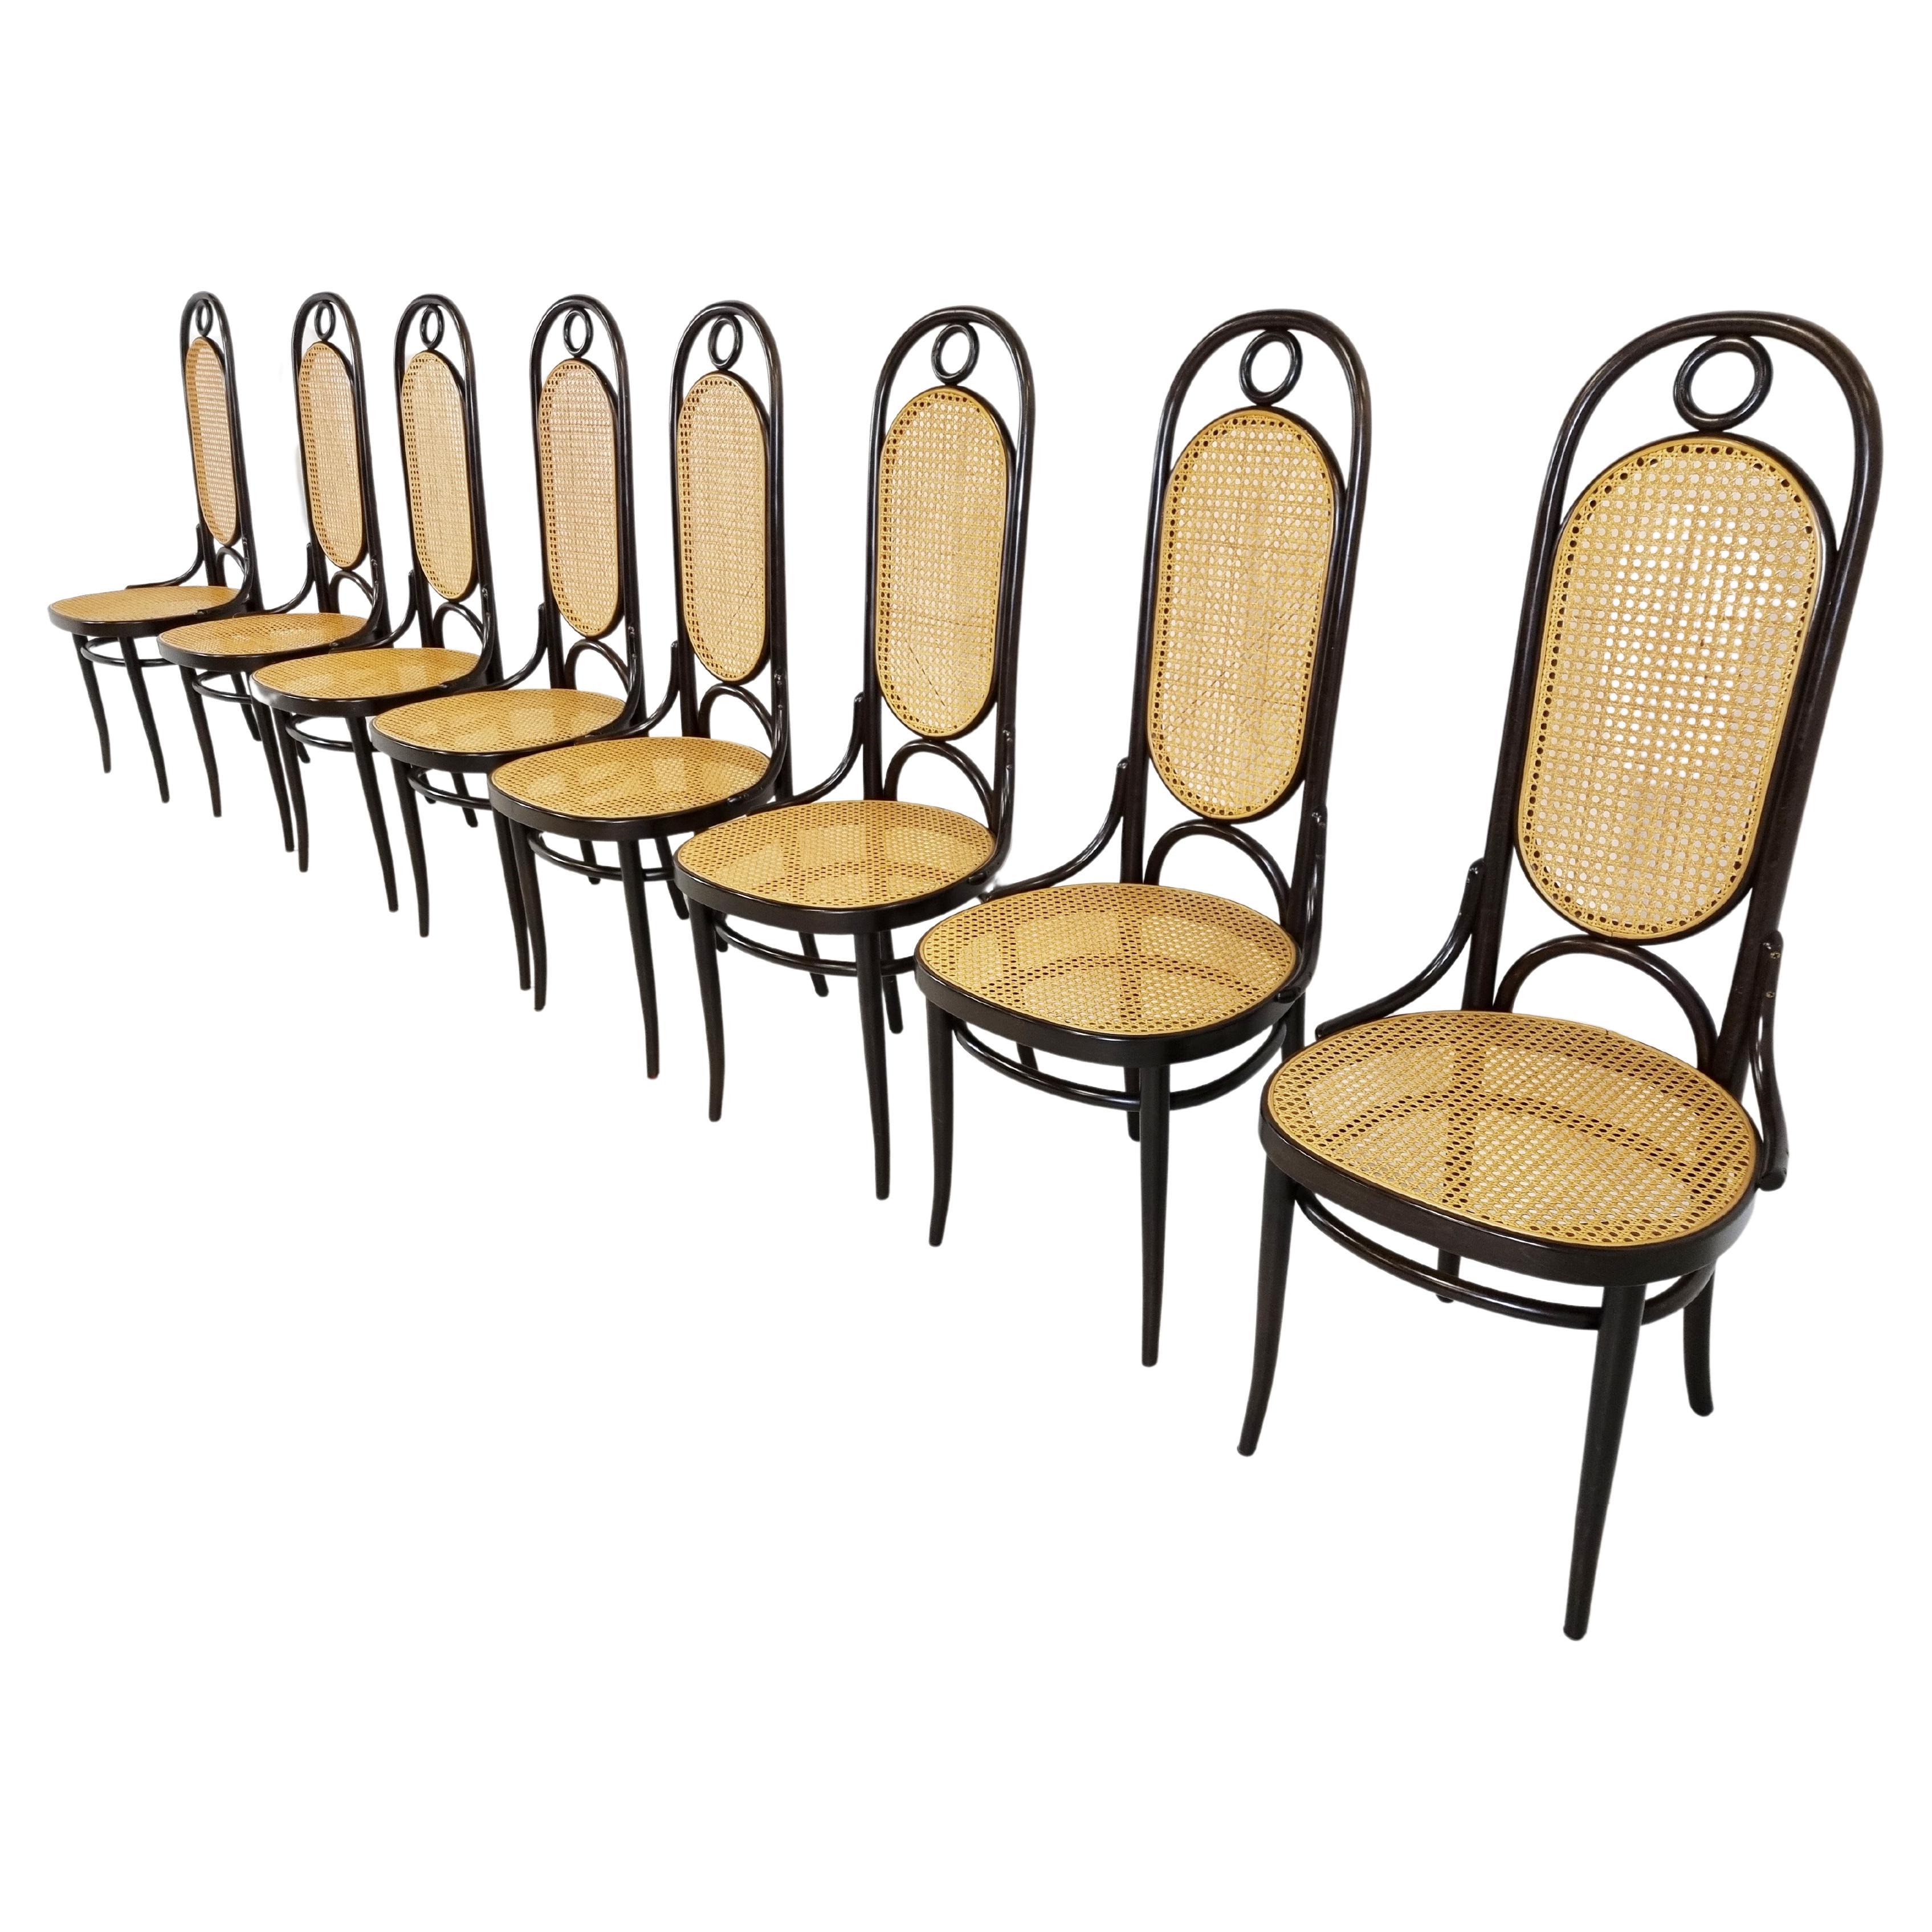 Thonet No. 17 Dining Chairs, Set of 8, 1980s